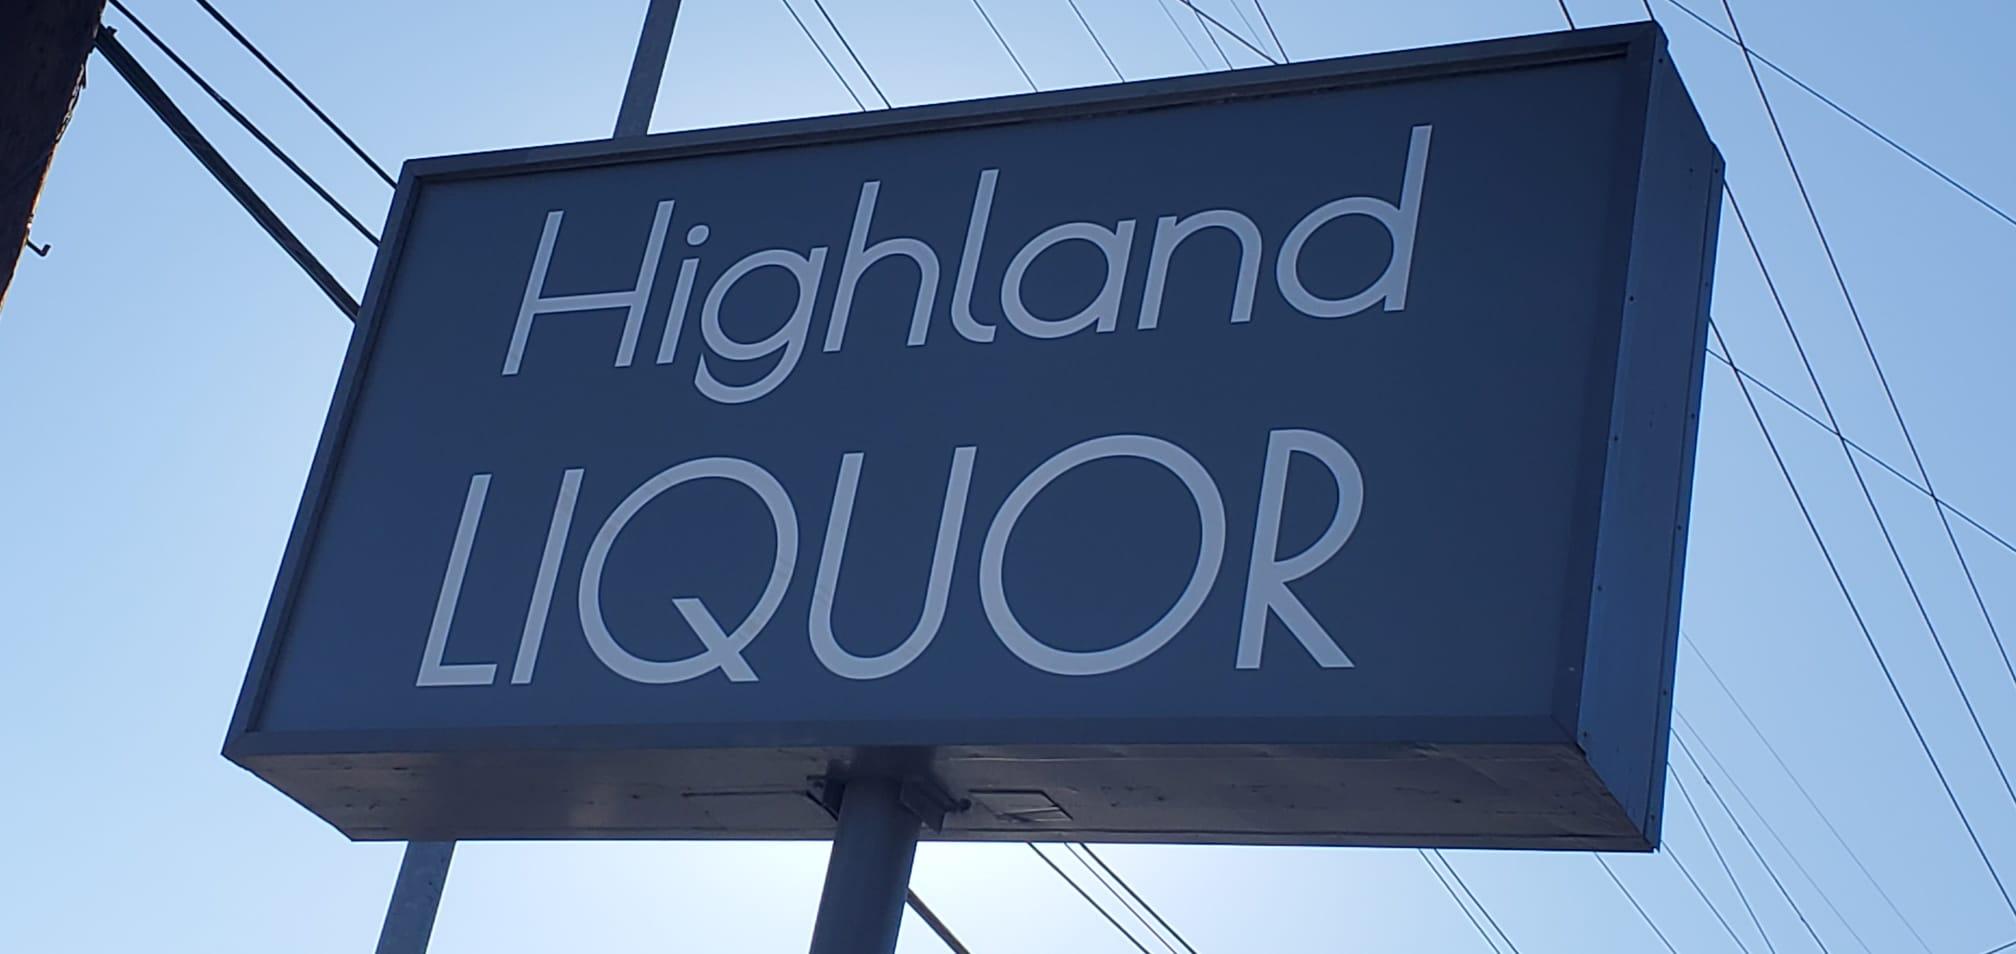 How do you attract more customers to your liquor establishment? With brightly lit pylon signs, that's how! Like our illuminated sign for Highland Liquor. Los Angeles sign company serving San Fernando Valley, Tarzana, Pomona and all of Southern California. Premium Sign Solutions Specializing in Storefront Signs, Lobby Signs, Indoor Signs and Outdoor Signs for Businesses.